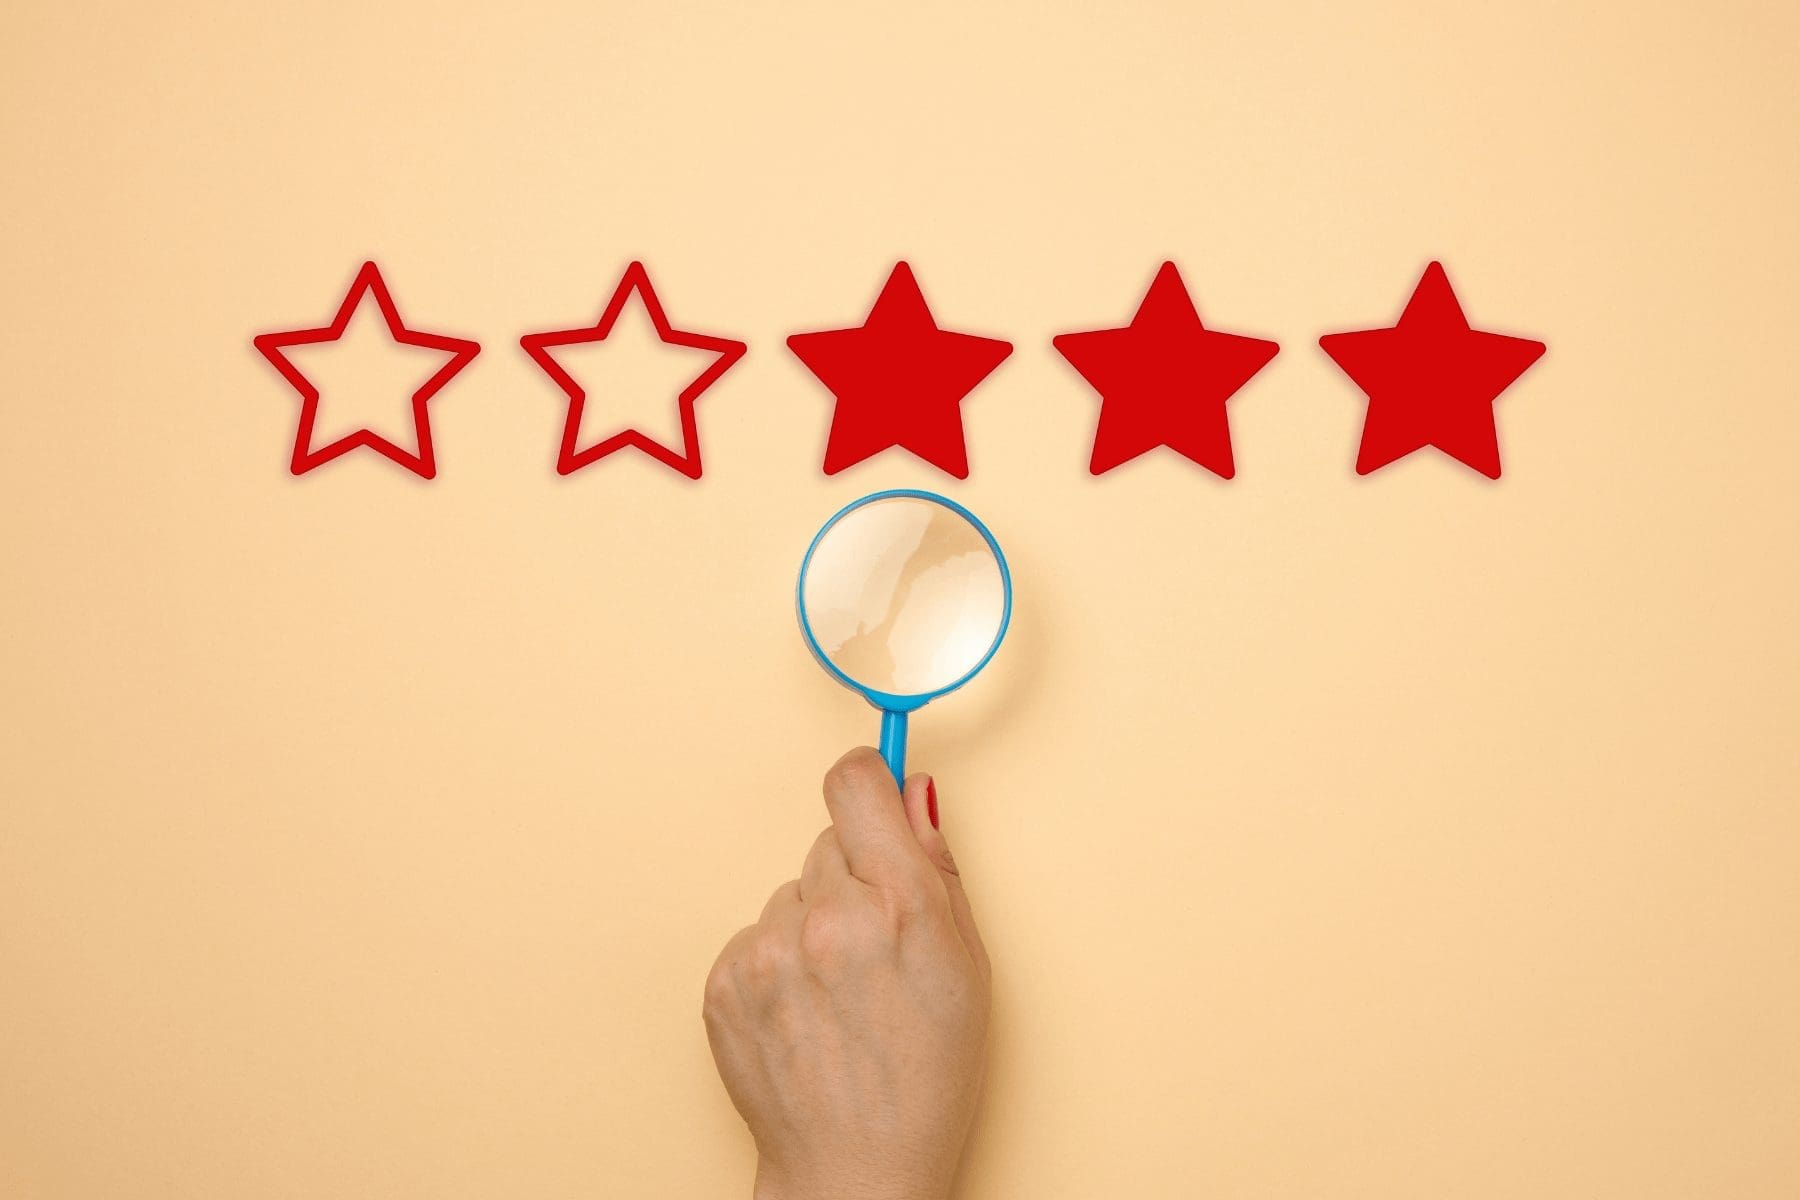 a three star rating illustrating a business's reputational risks